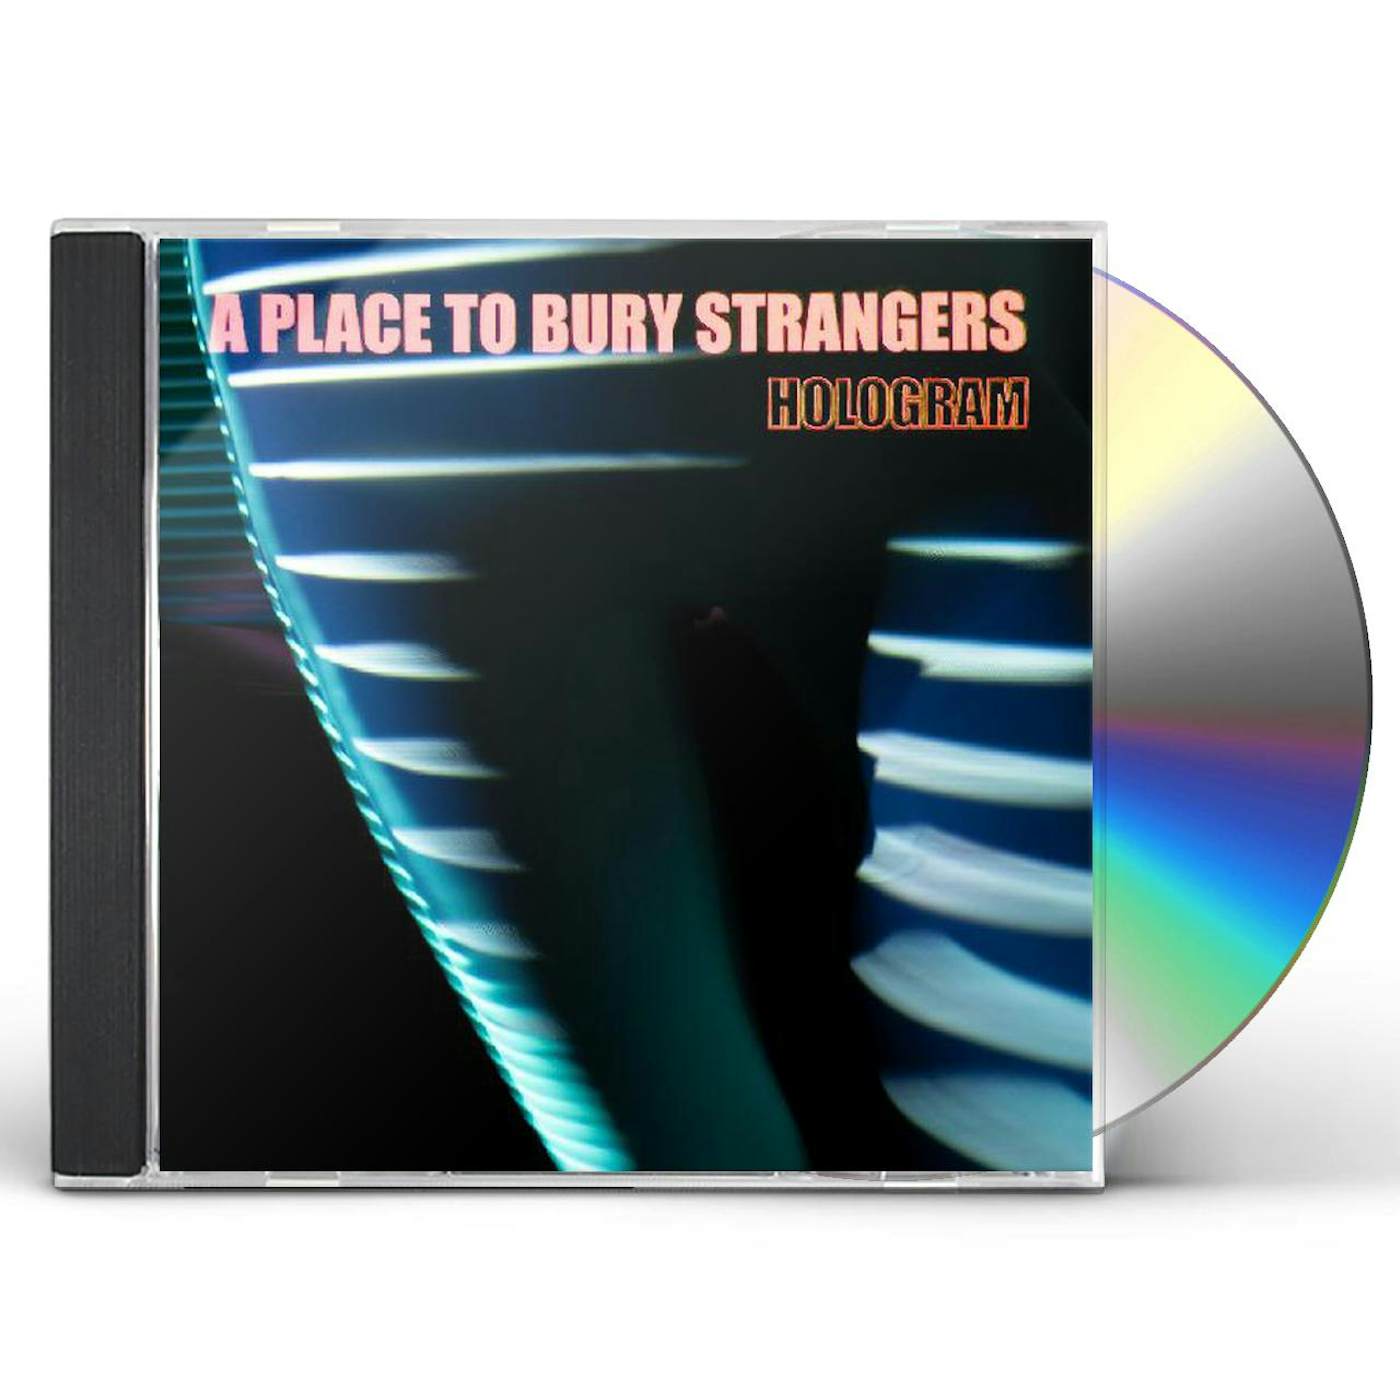 A Place To Bury Strangers HOLOGRAM CD